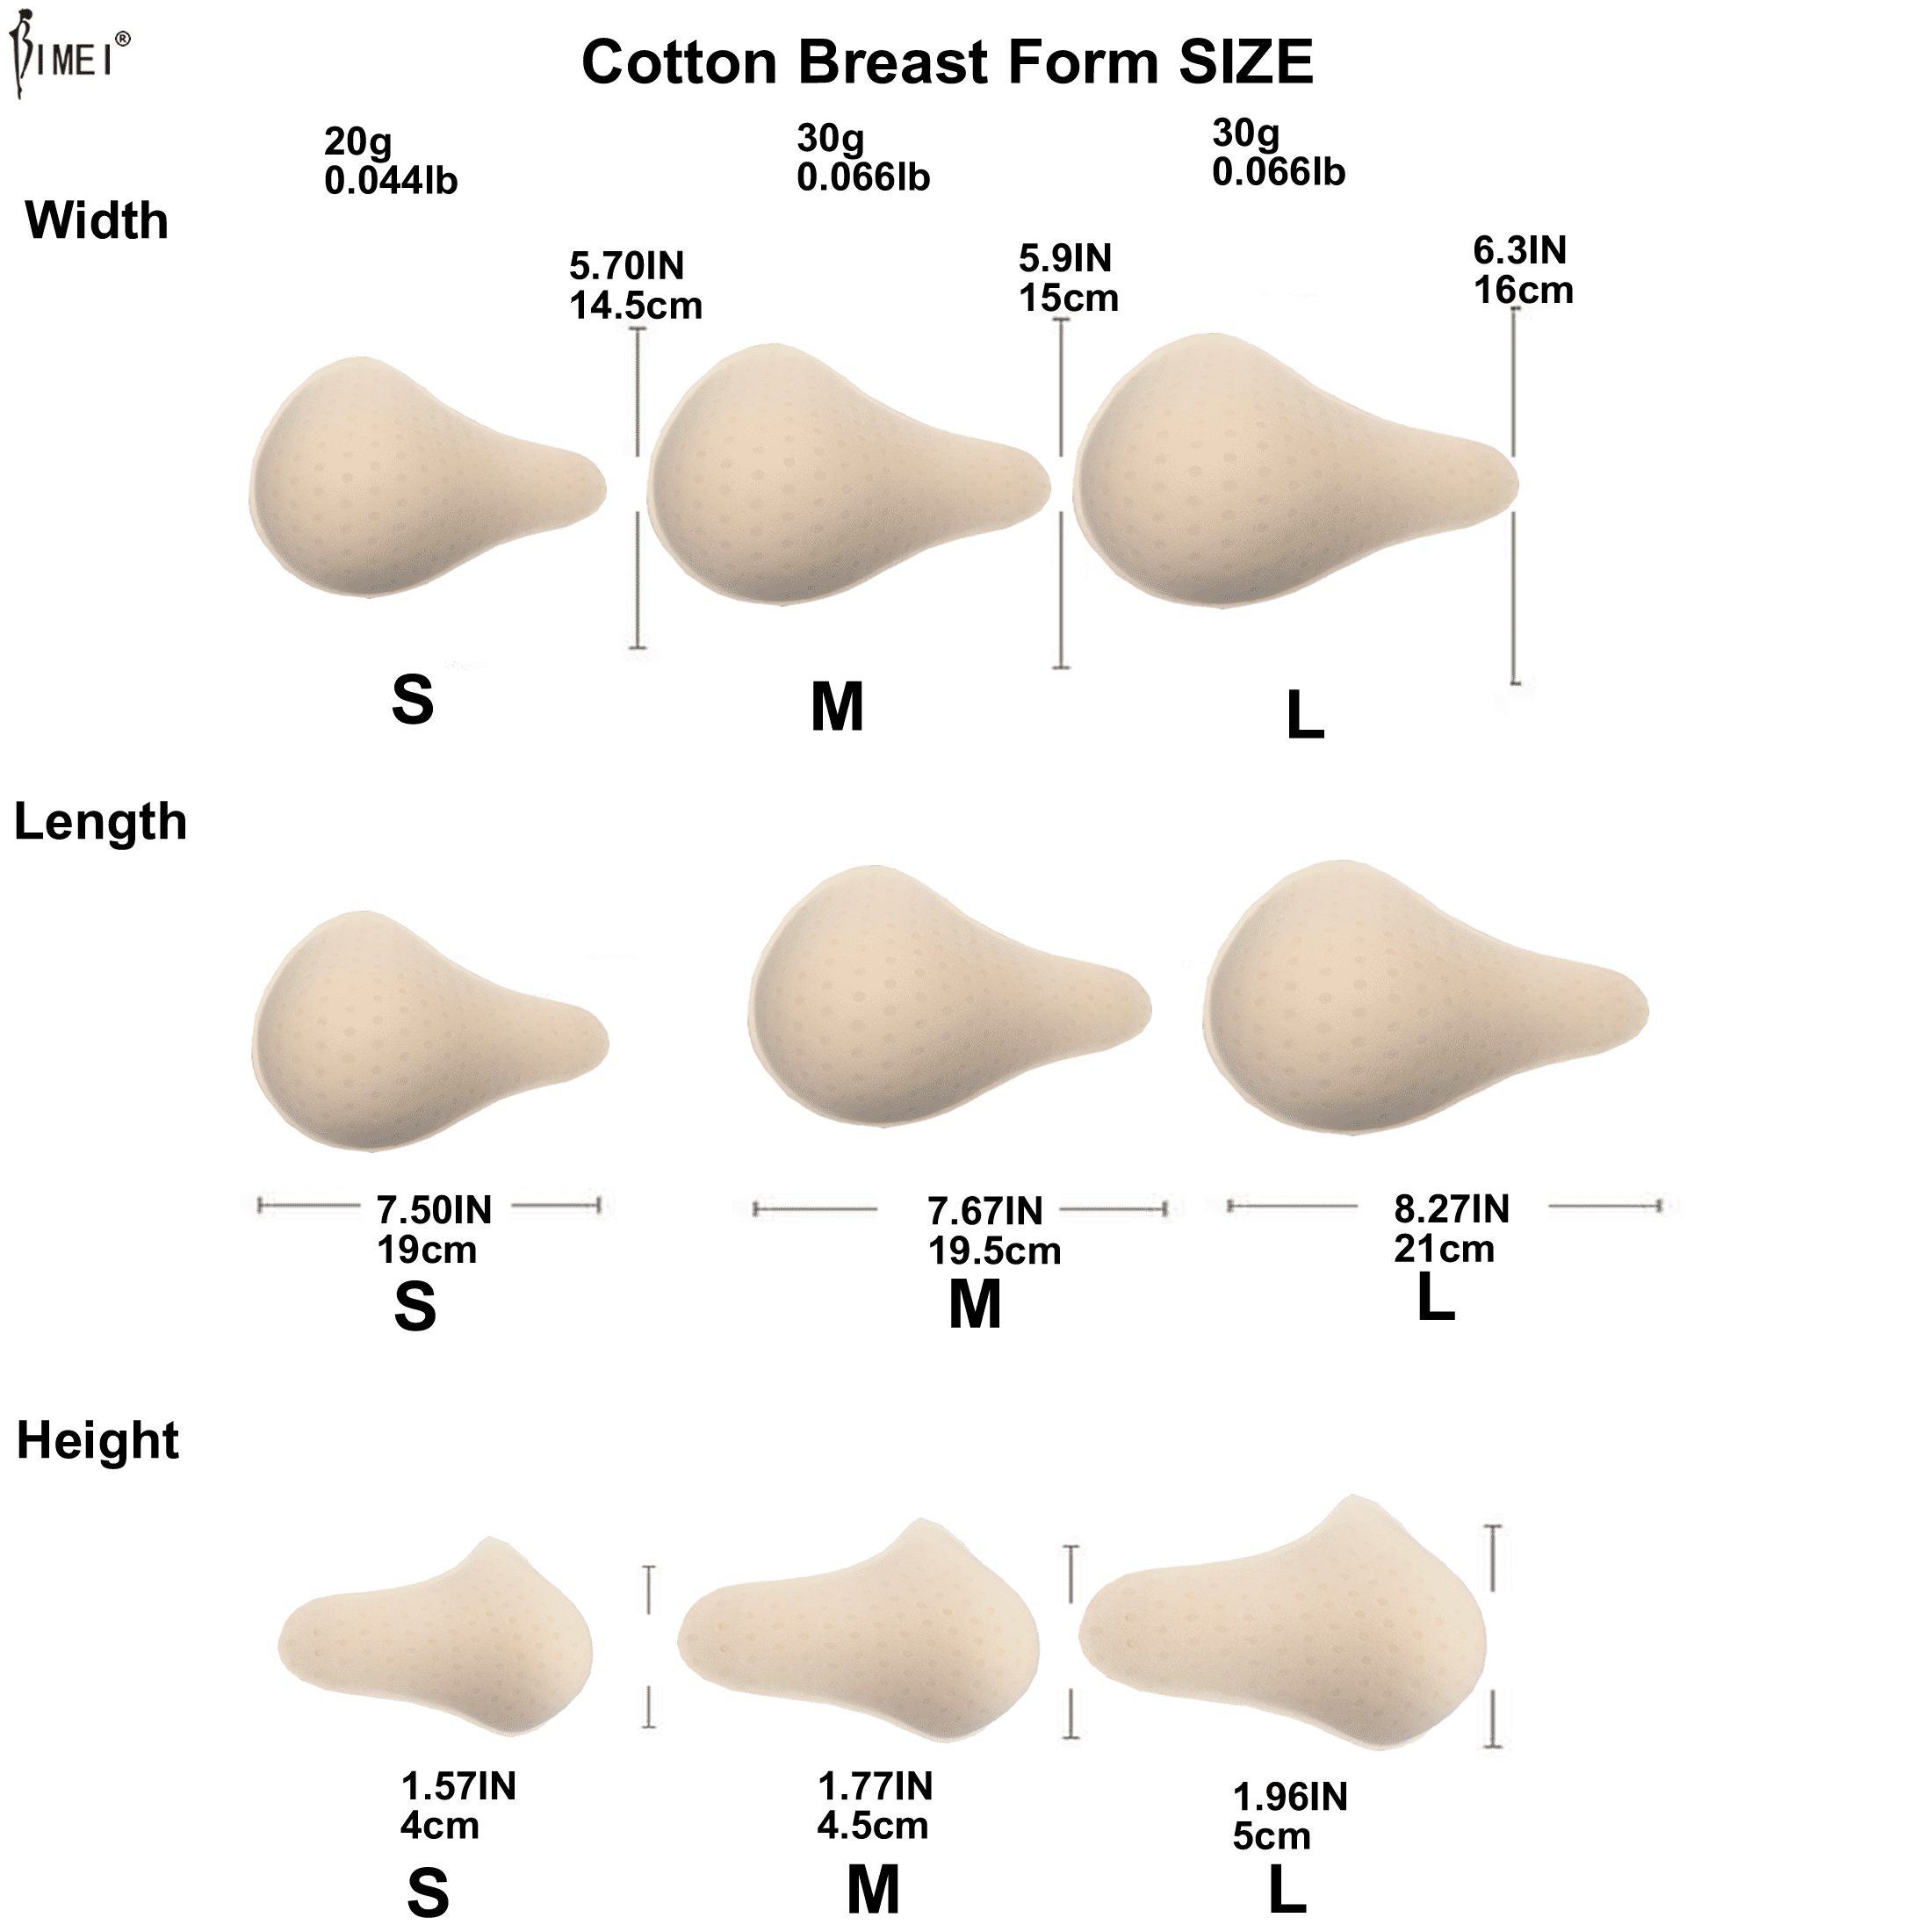 BIMEI Cotton Breast Forms Light Ventilatio Sponge Boobs for Women  Mastectomy Breast Cancer Support，1 Piece，Holey Lengthened，Left,L 